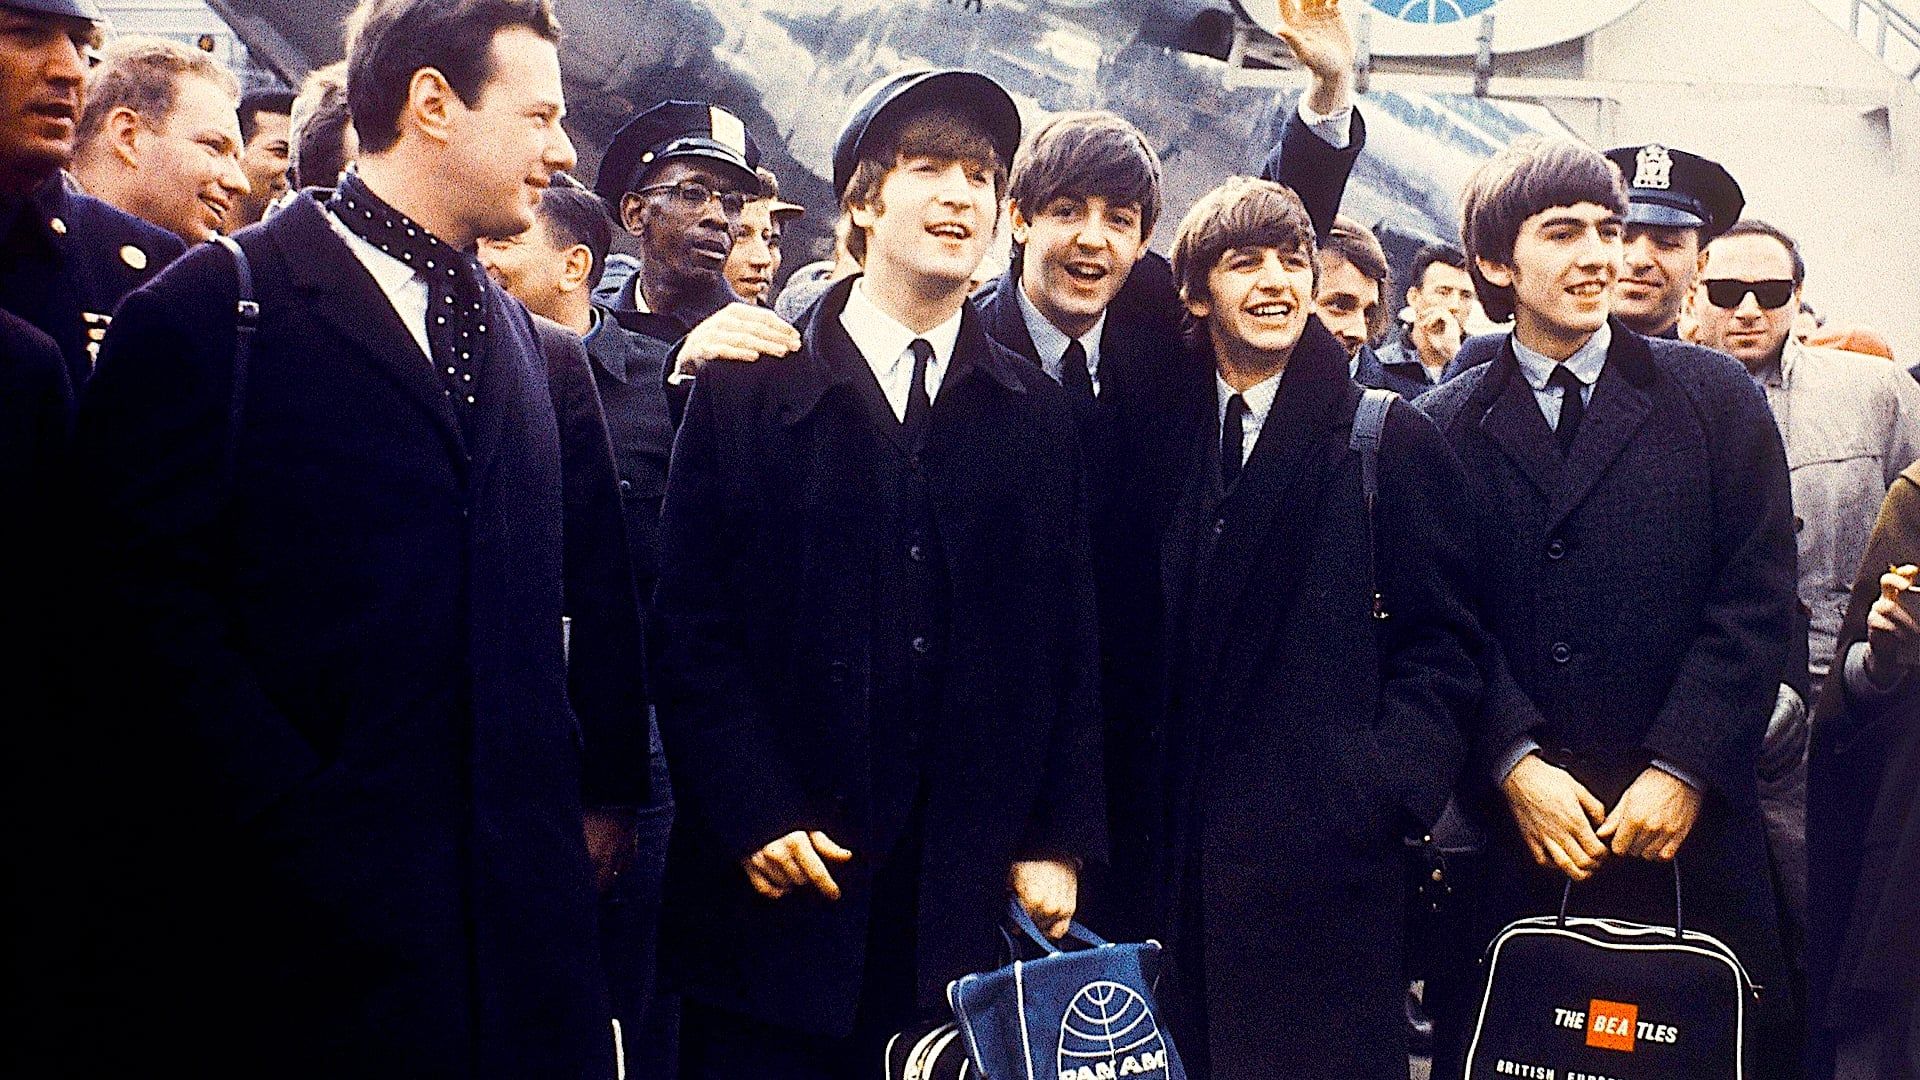 The Beatles: The First U.S. Visit background